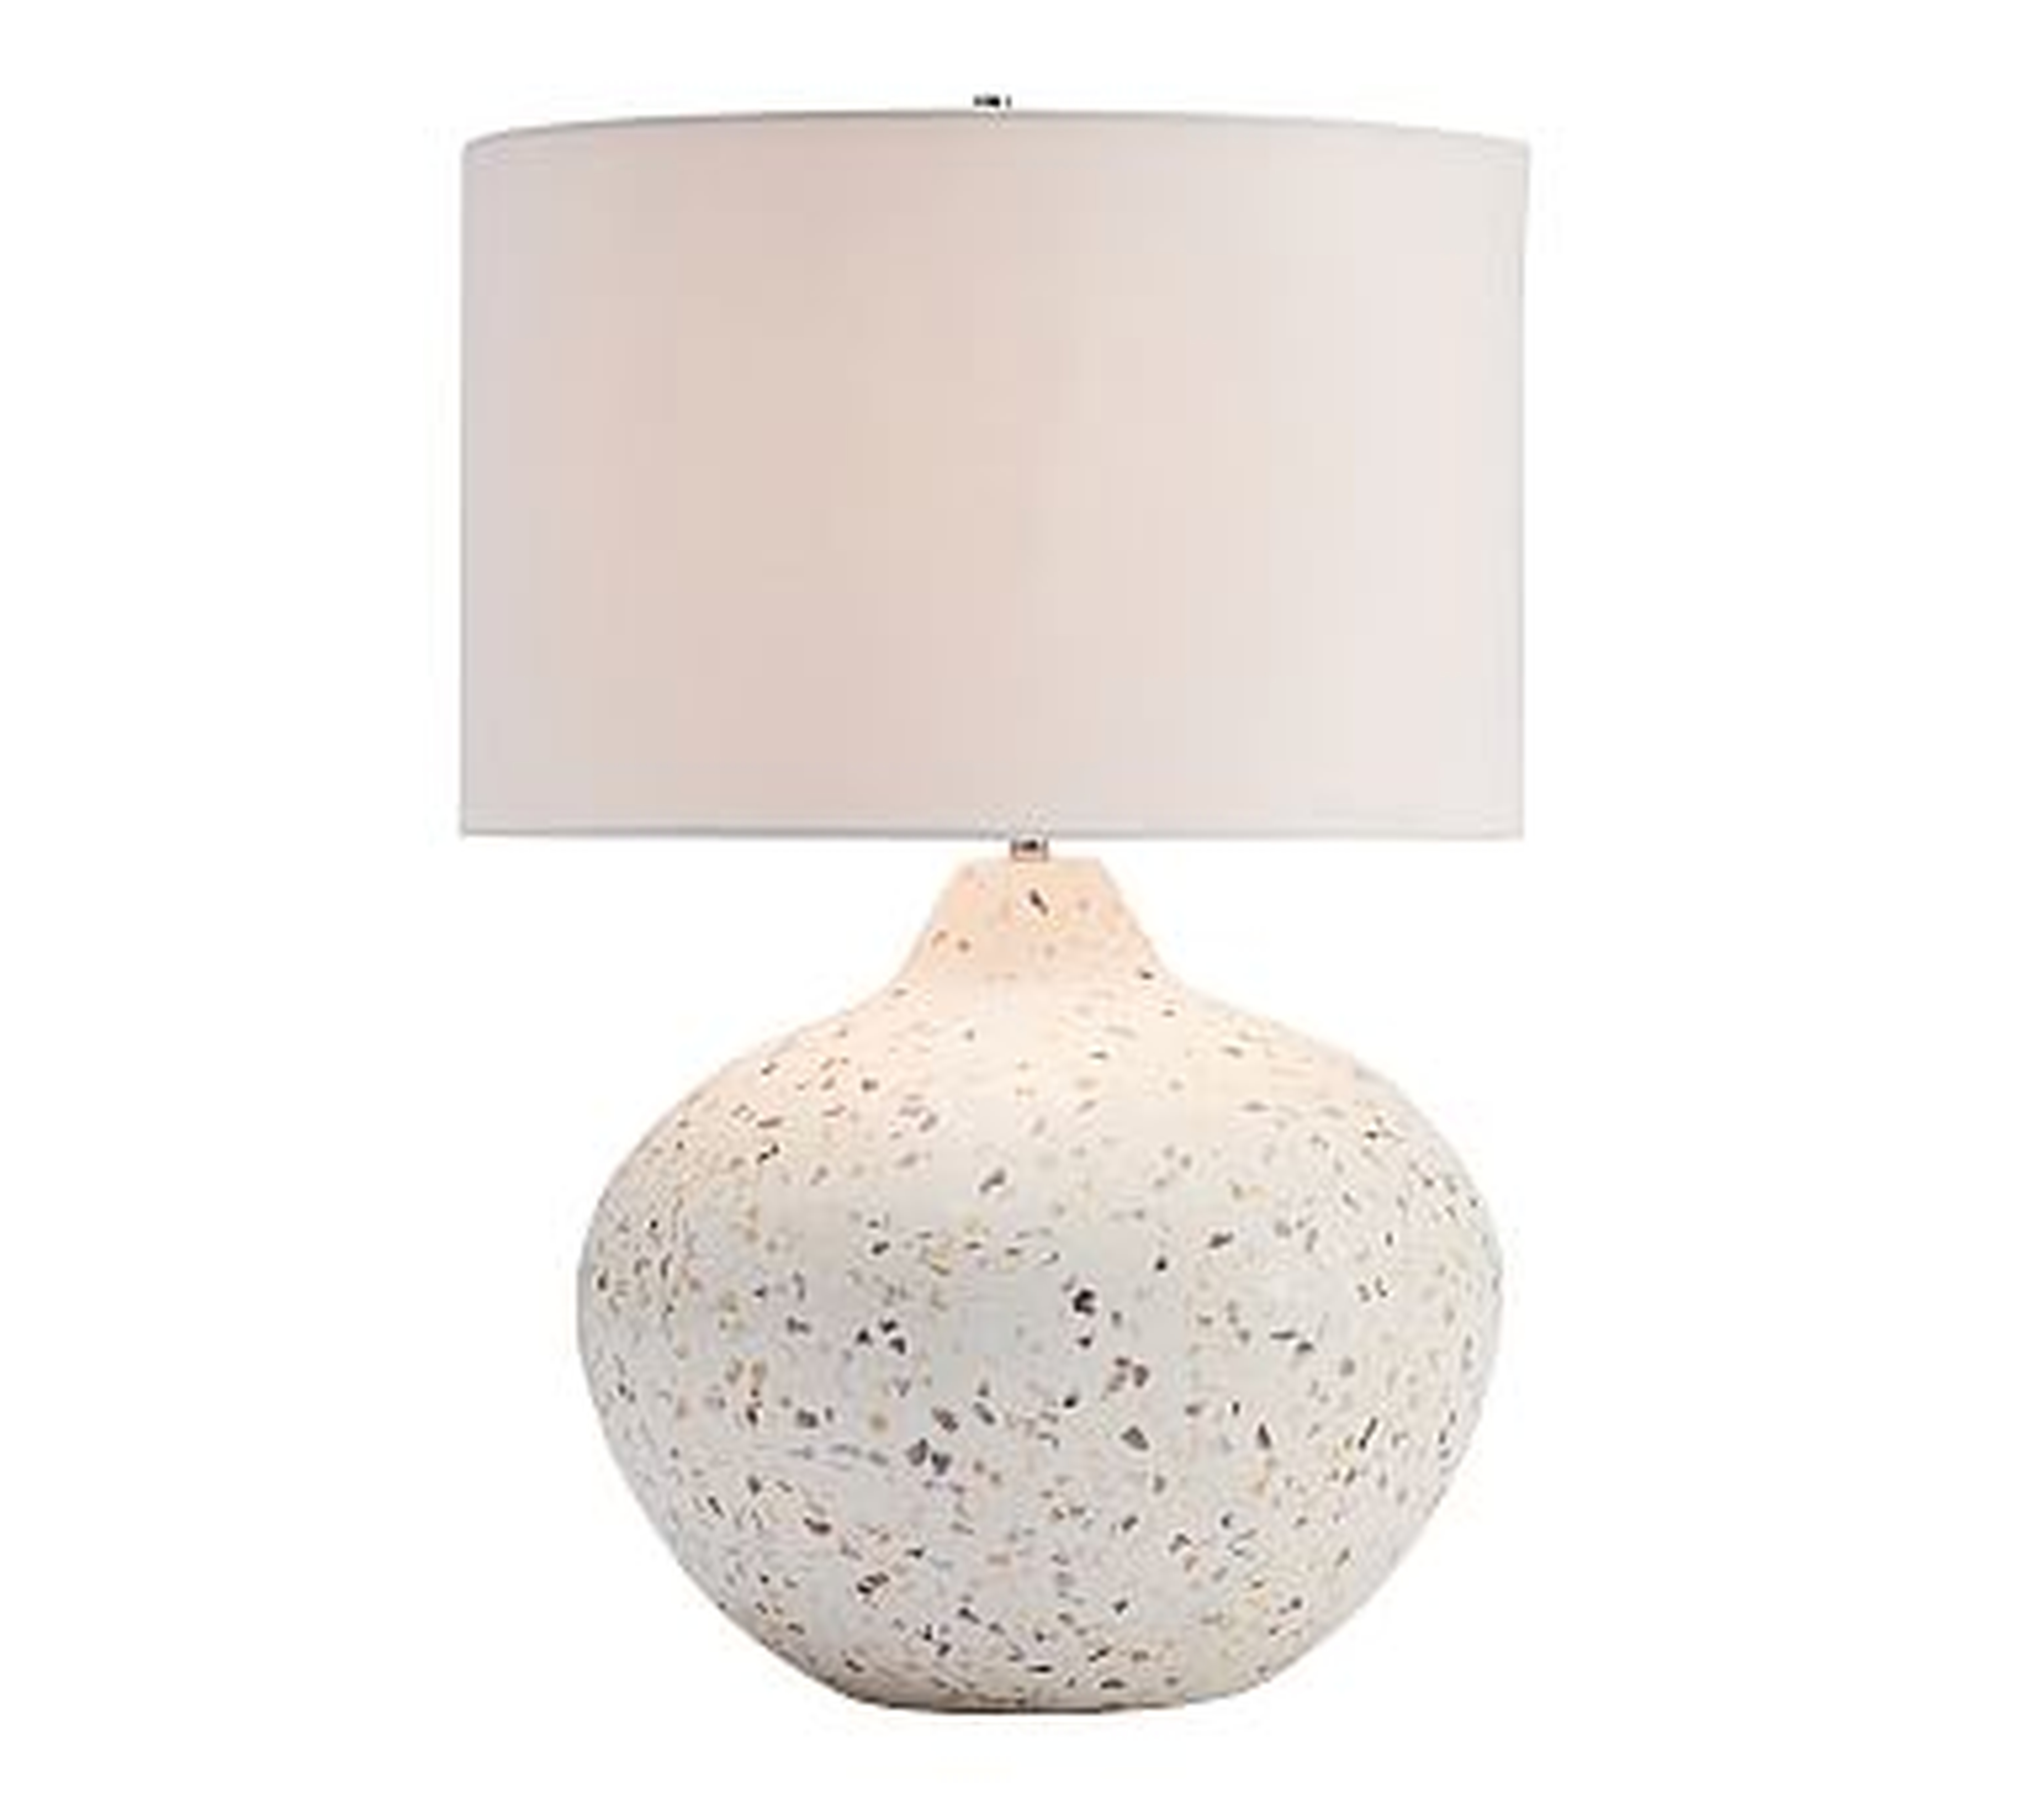 Capri Terrazzo Round Table Lamp with Extra Large Straight Sided Gallery Shade, White - Pottery Barn